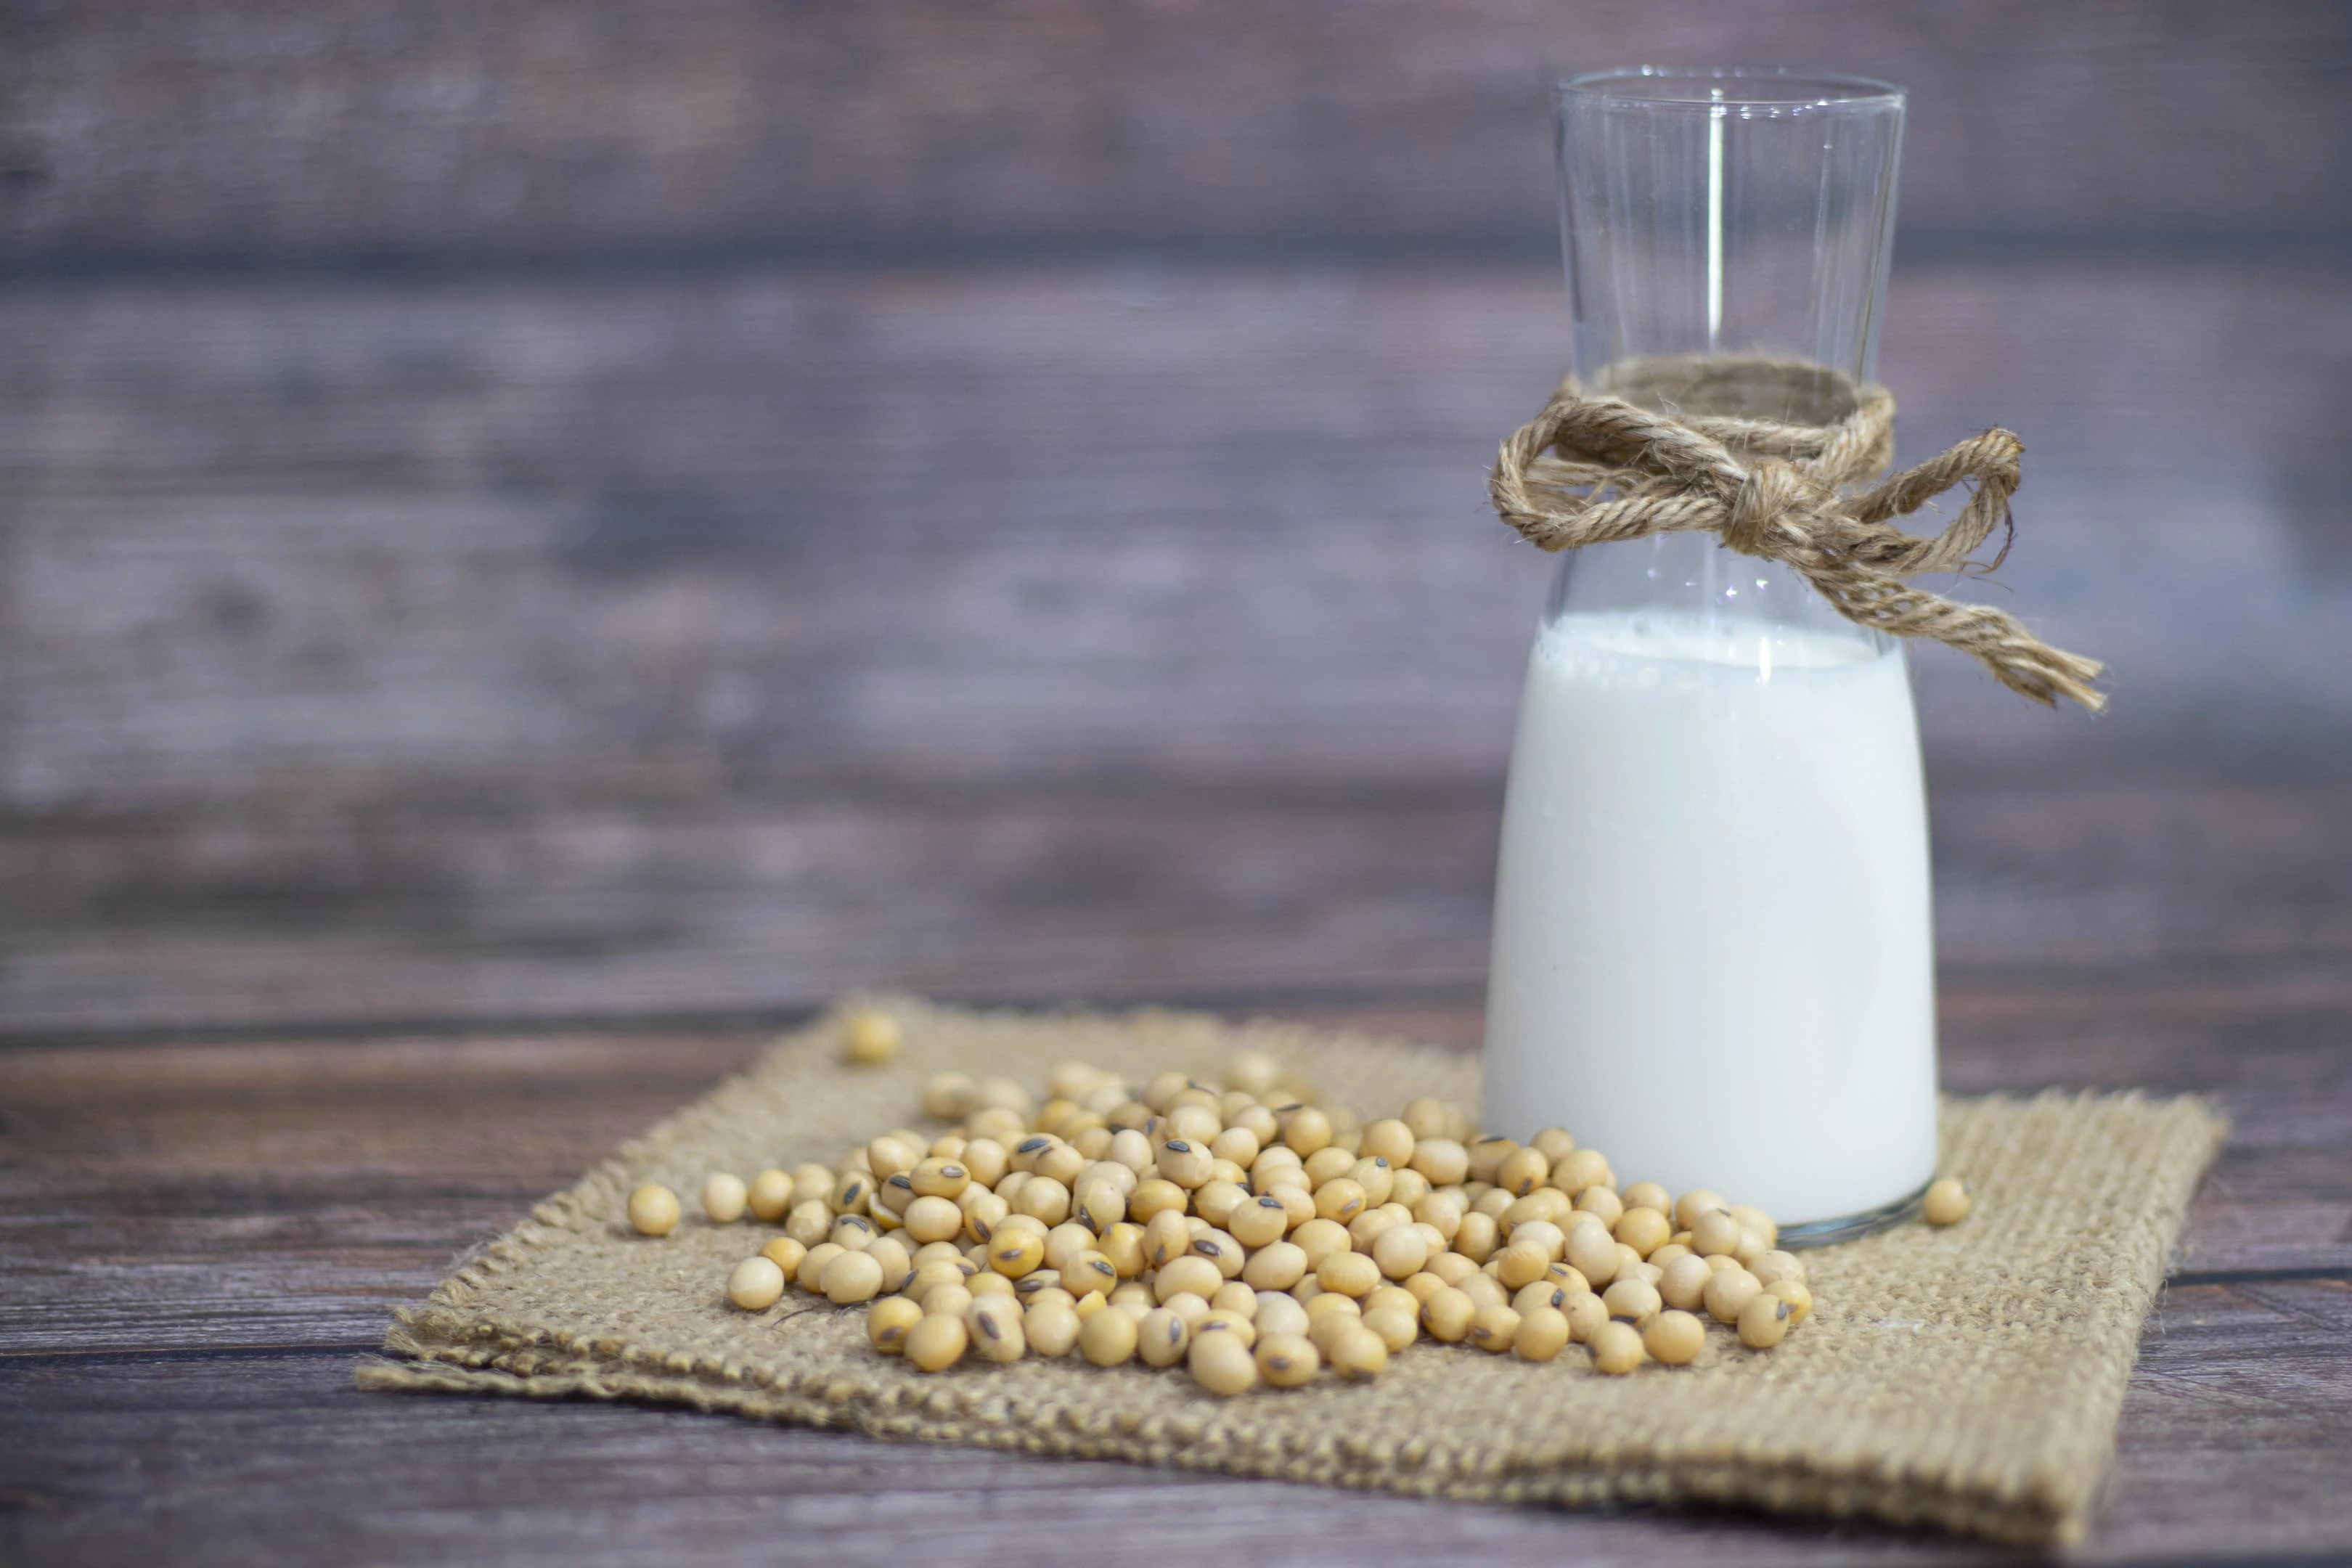 Soy milk is one of the no-calcium foods